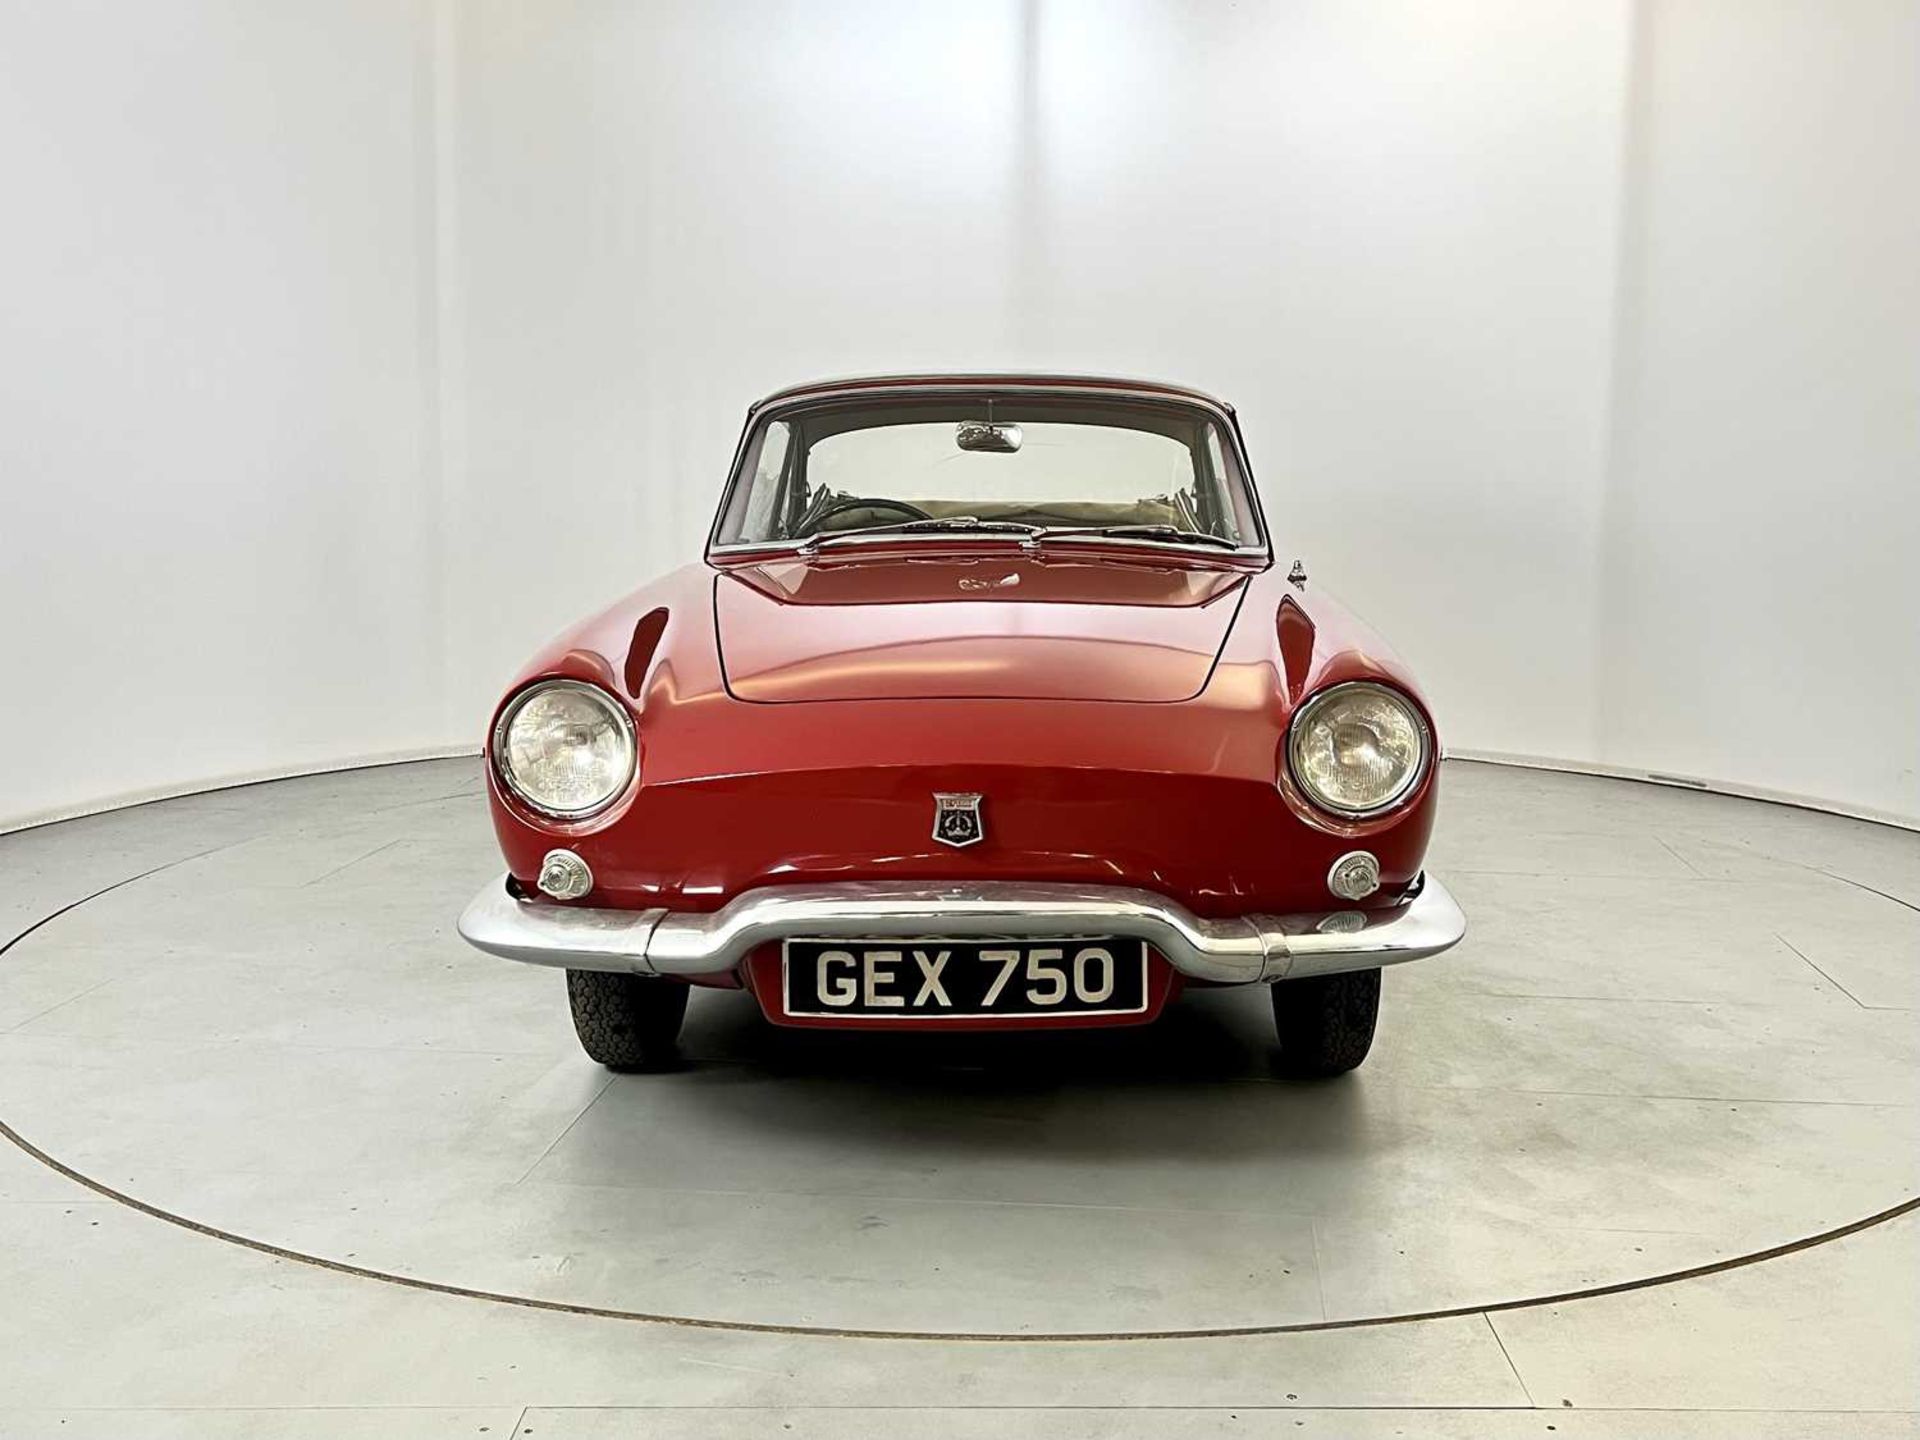 1962 Renault Floride Convertible - Image 2 of 43